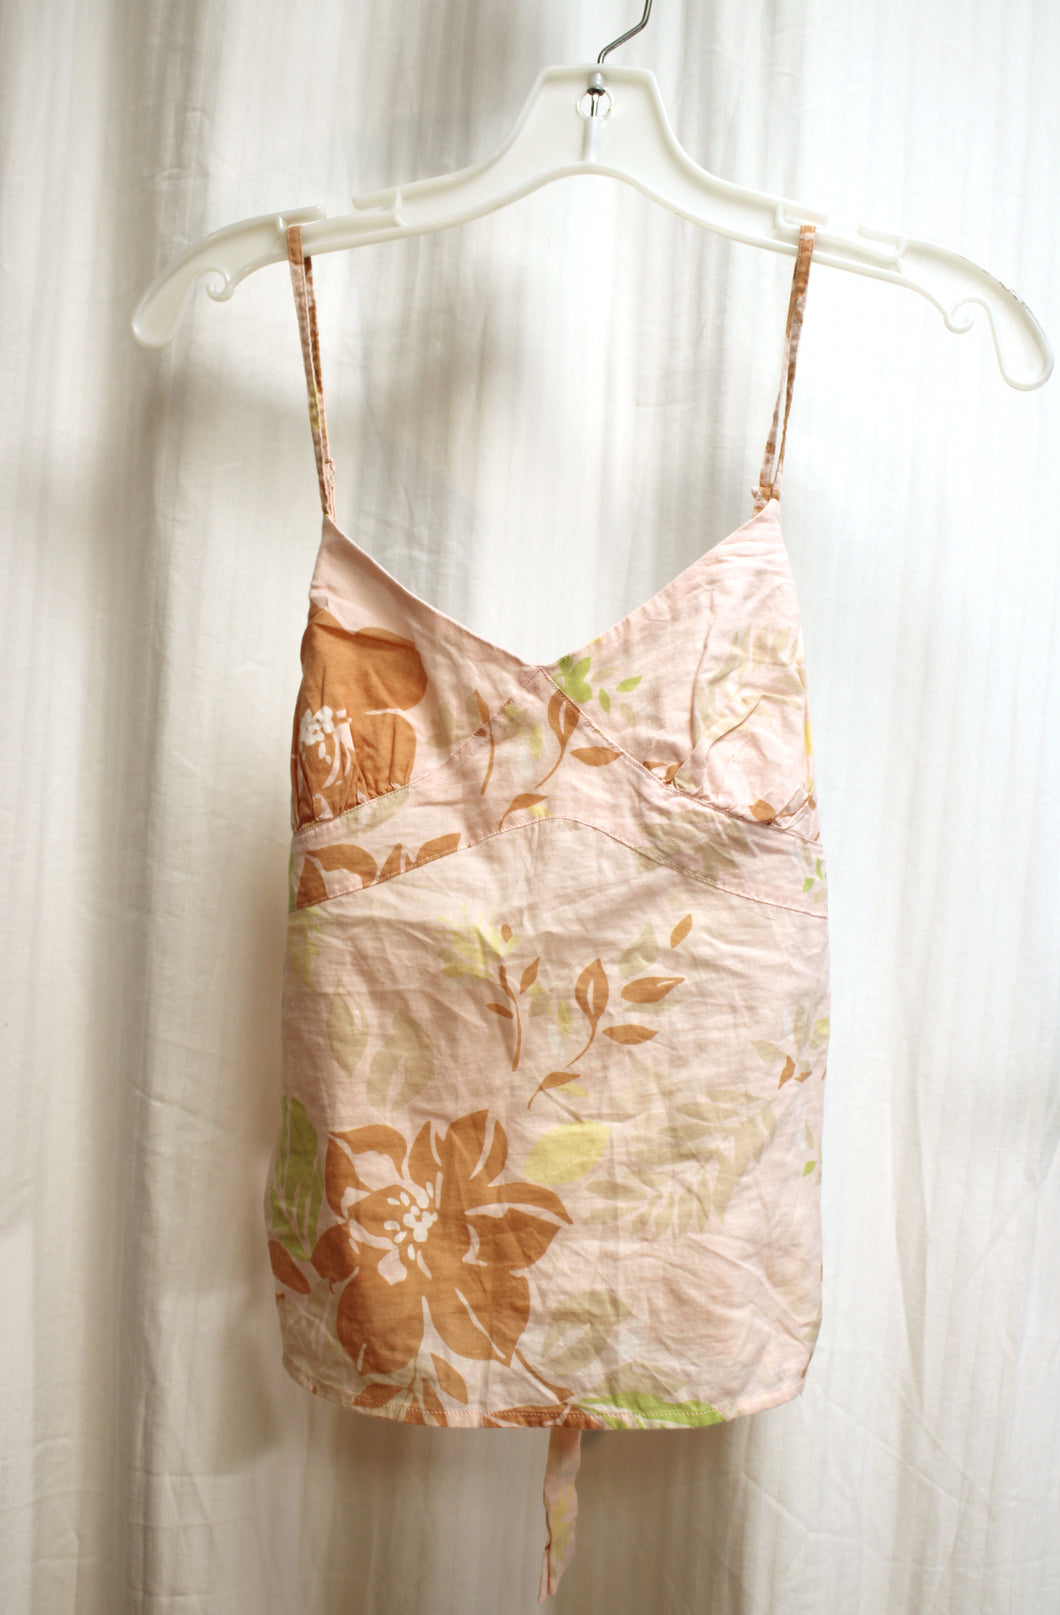 American Eagle Outfitters - Pink Floral Spaghetti Strap Tie Back Tank Top - Size 2